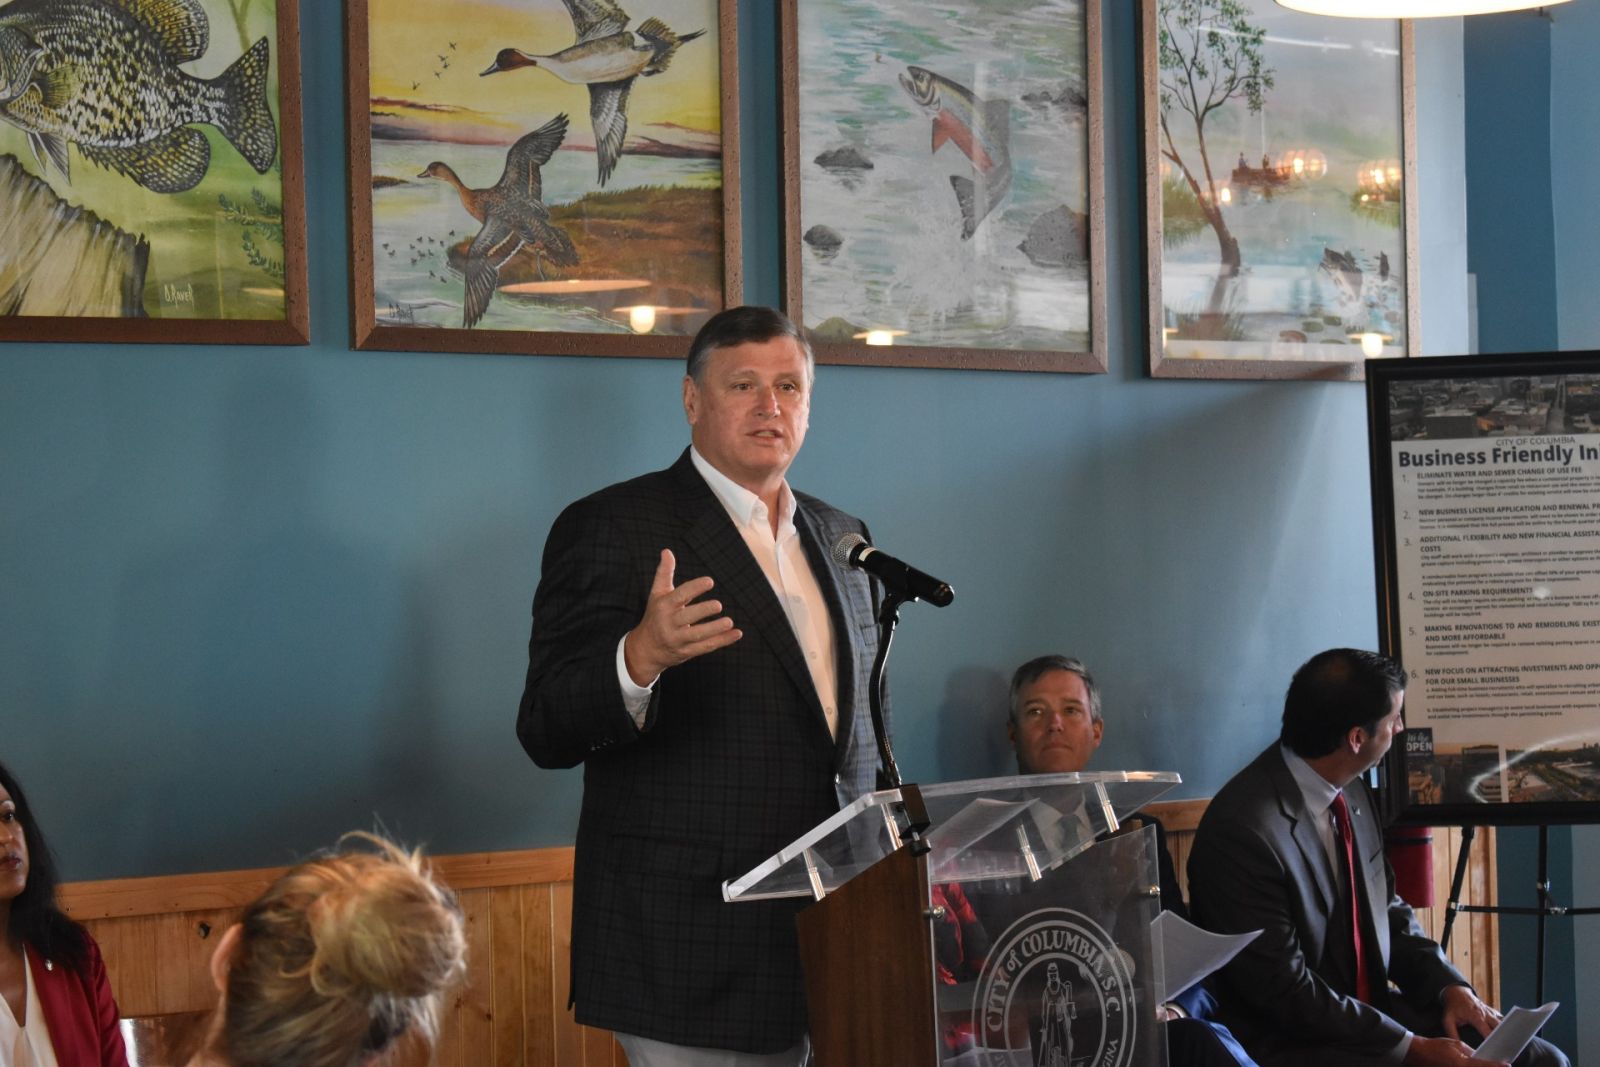 Columbia City Councilman Joe Taylor speaks Monday at a news conference announcing changes to business regulations. Columbia Mayor Daniel Rickenmann looks on. (Photo/Christina Lee Knauss)